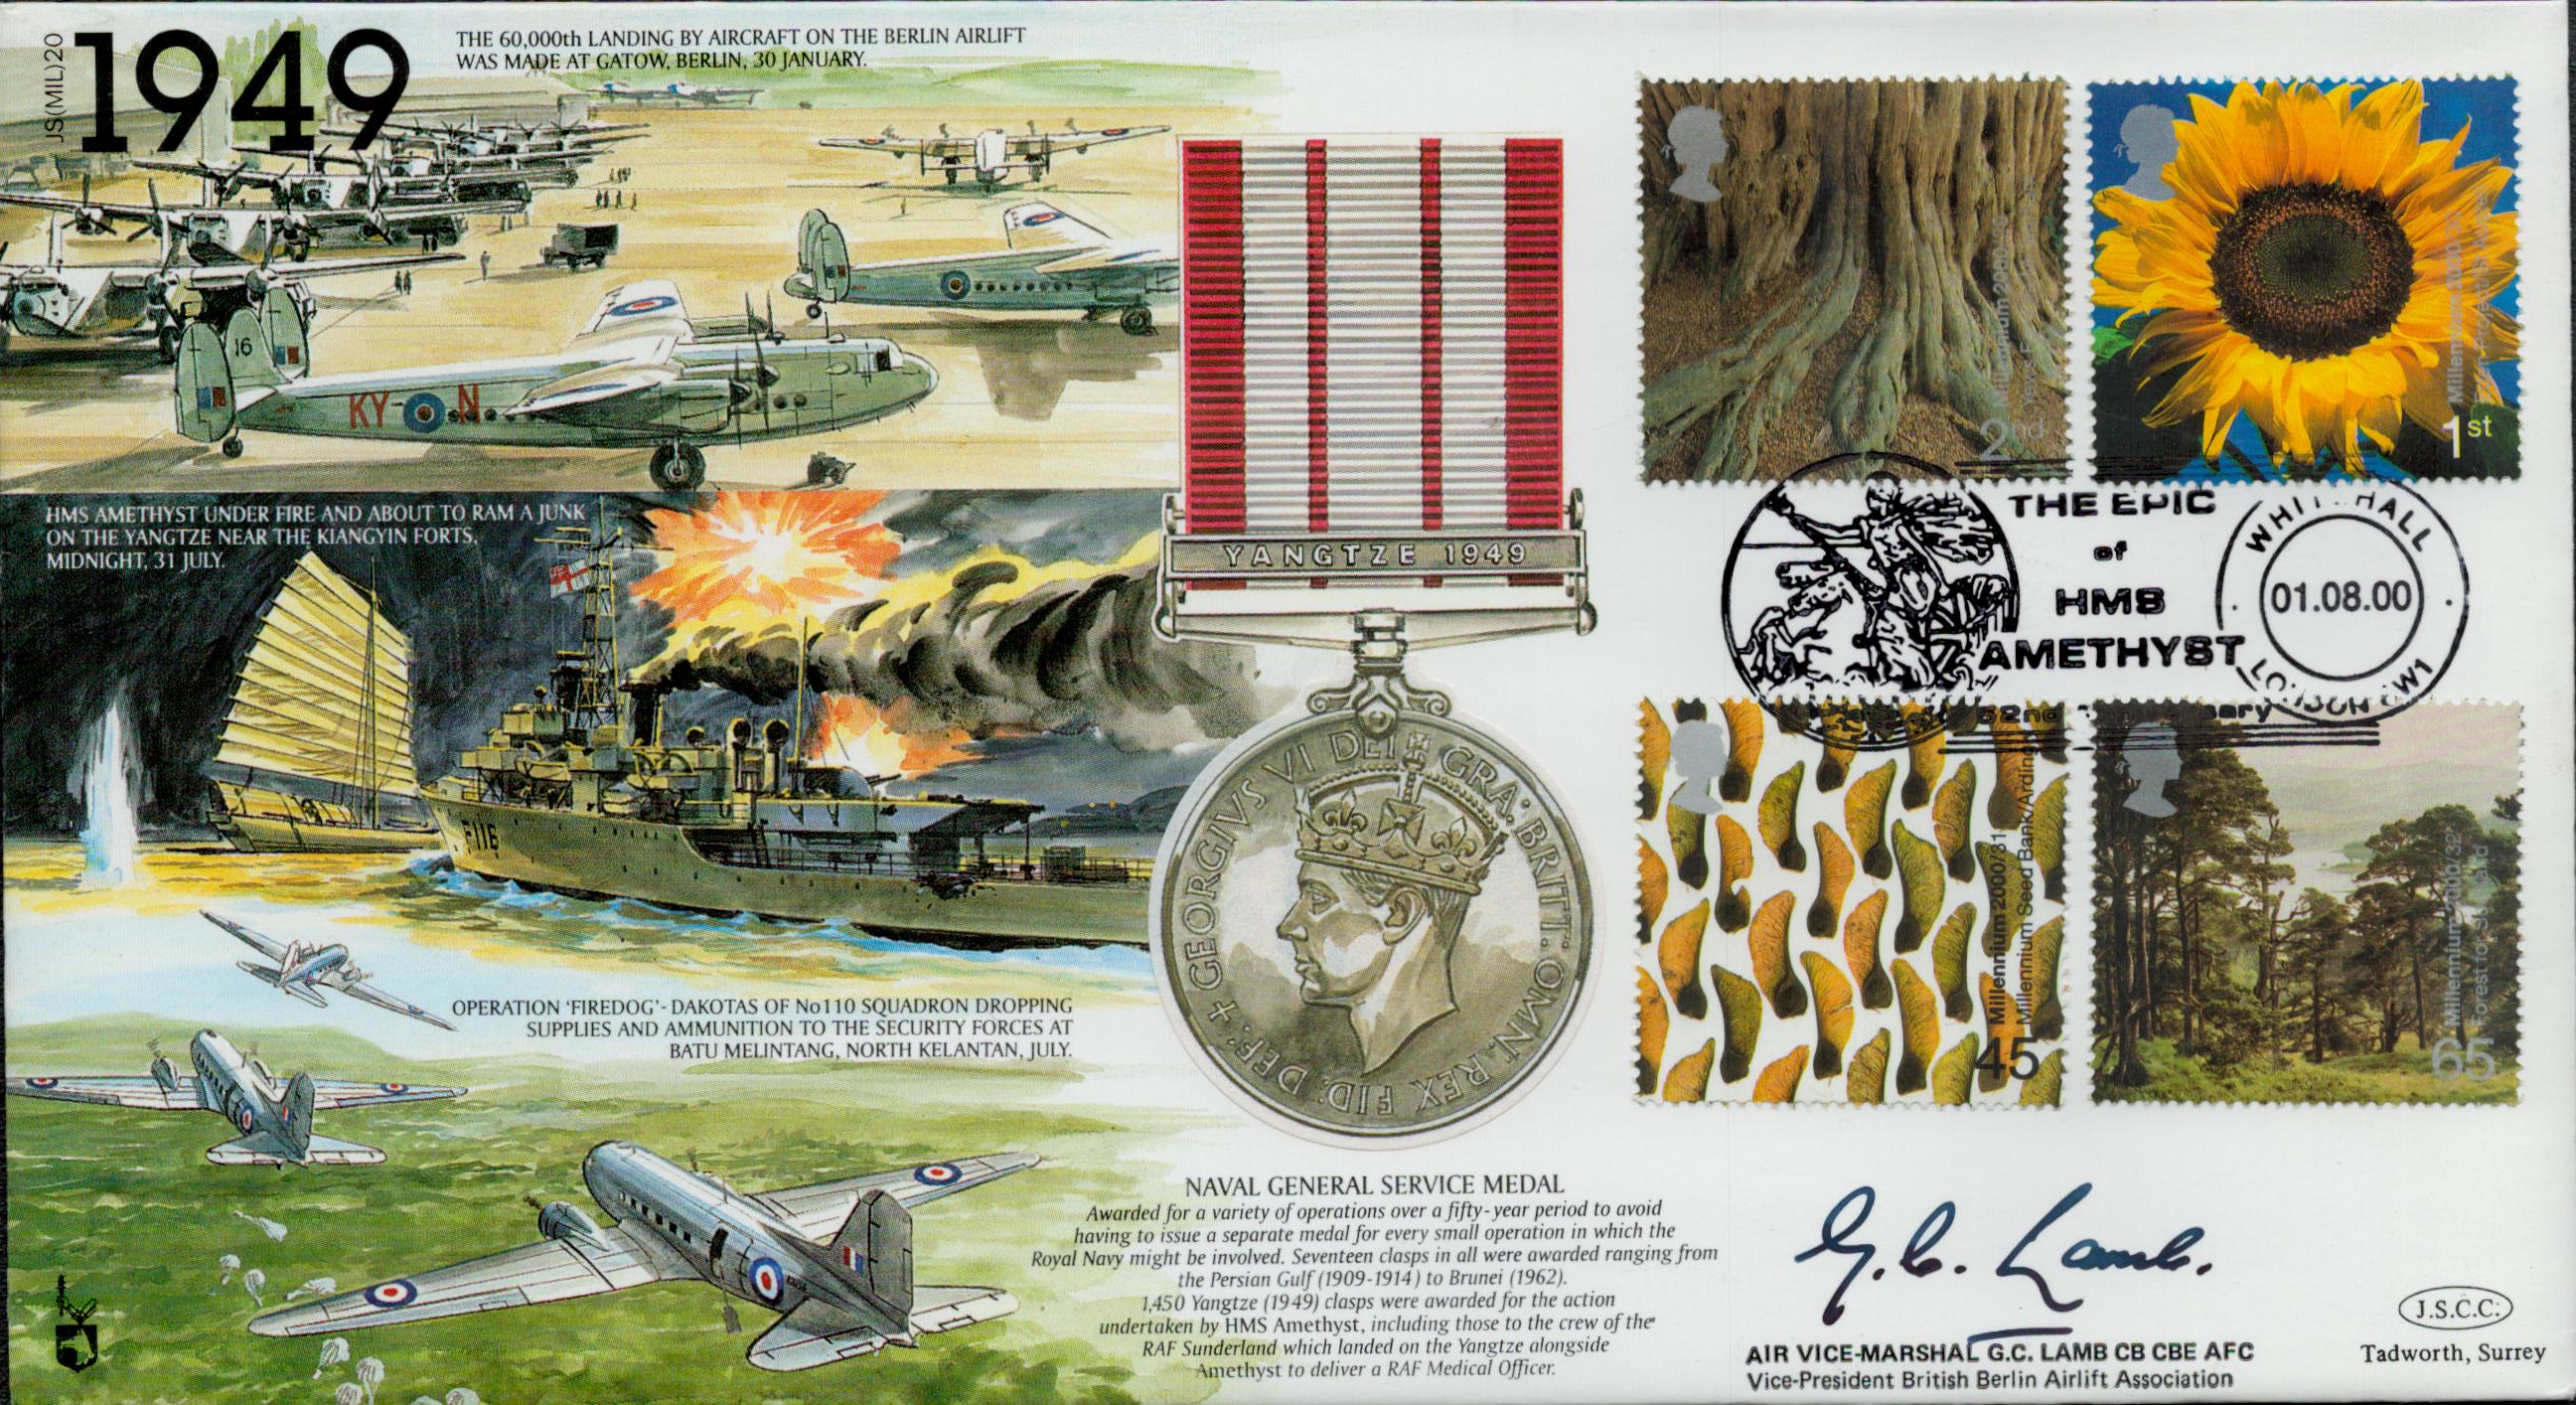 Air Vice Marshal G.C Lamb CB CBE AFC signed 1949 HMS Amethyst commemorative FDC (JS(MIL)20) PM THE - Image 3 of 3